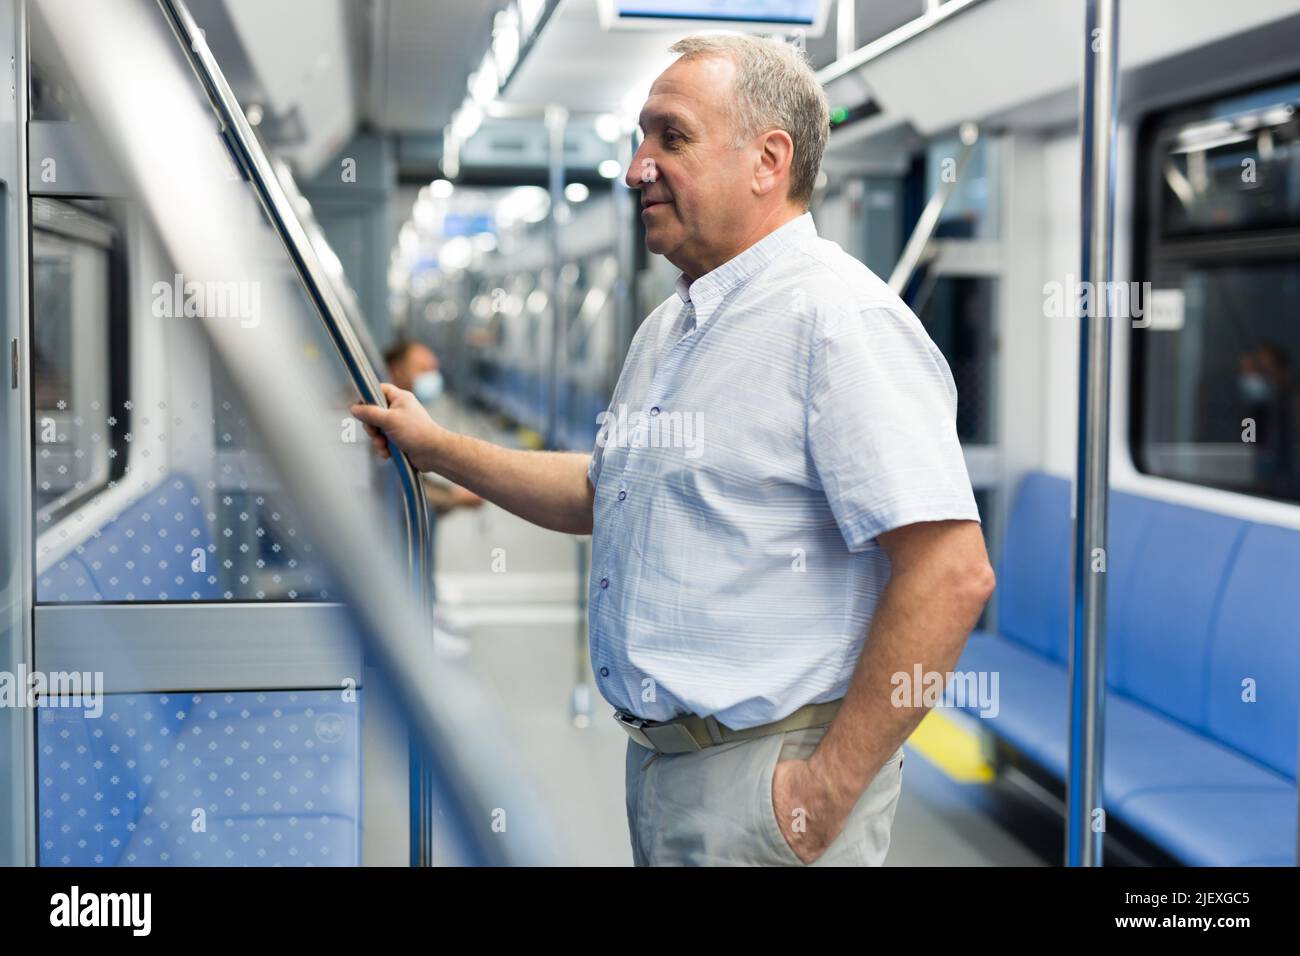 Pensioner 60 year old rides in an subway car Stock Photo